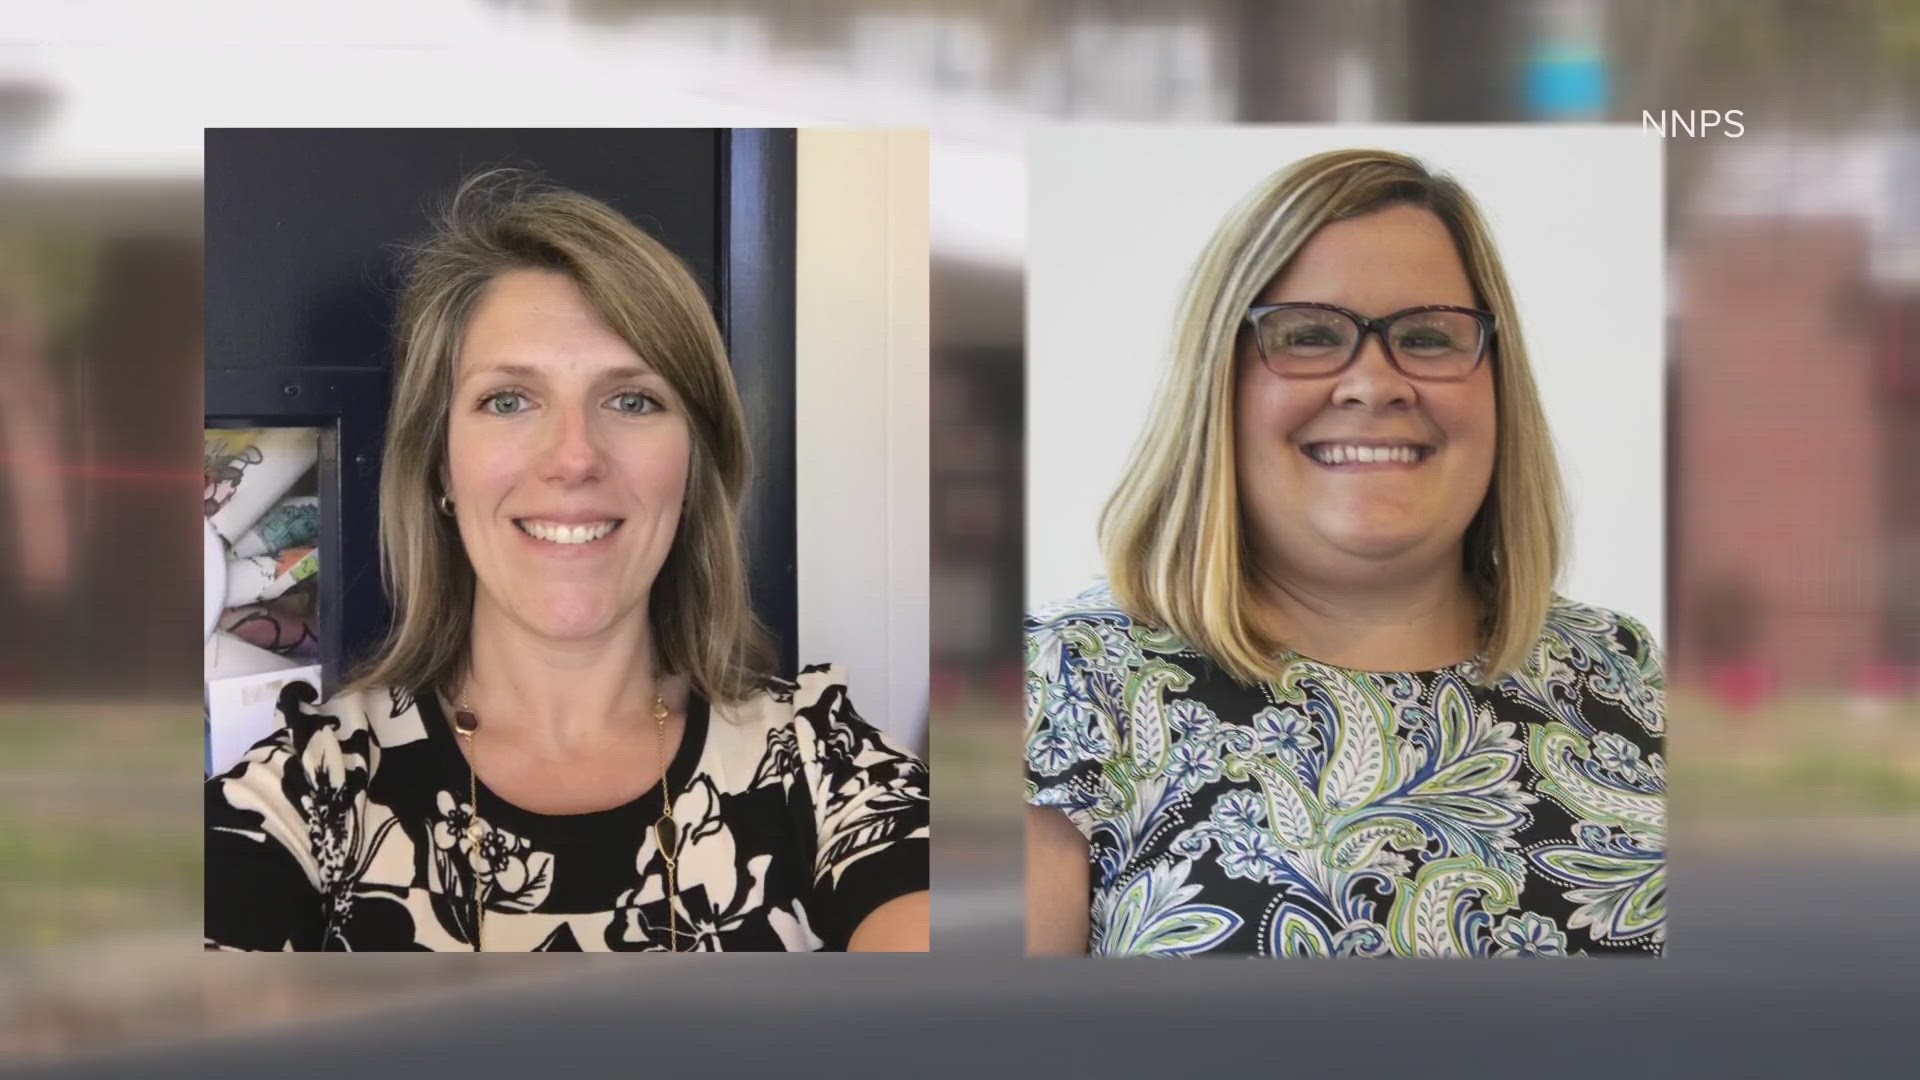 New leadership is coming to Richneck Elementary School in Newport News. School board members named the next principal and assistant principal.